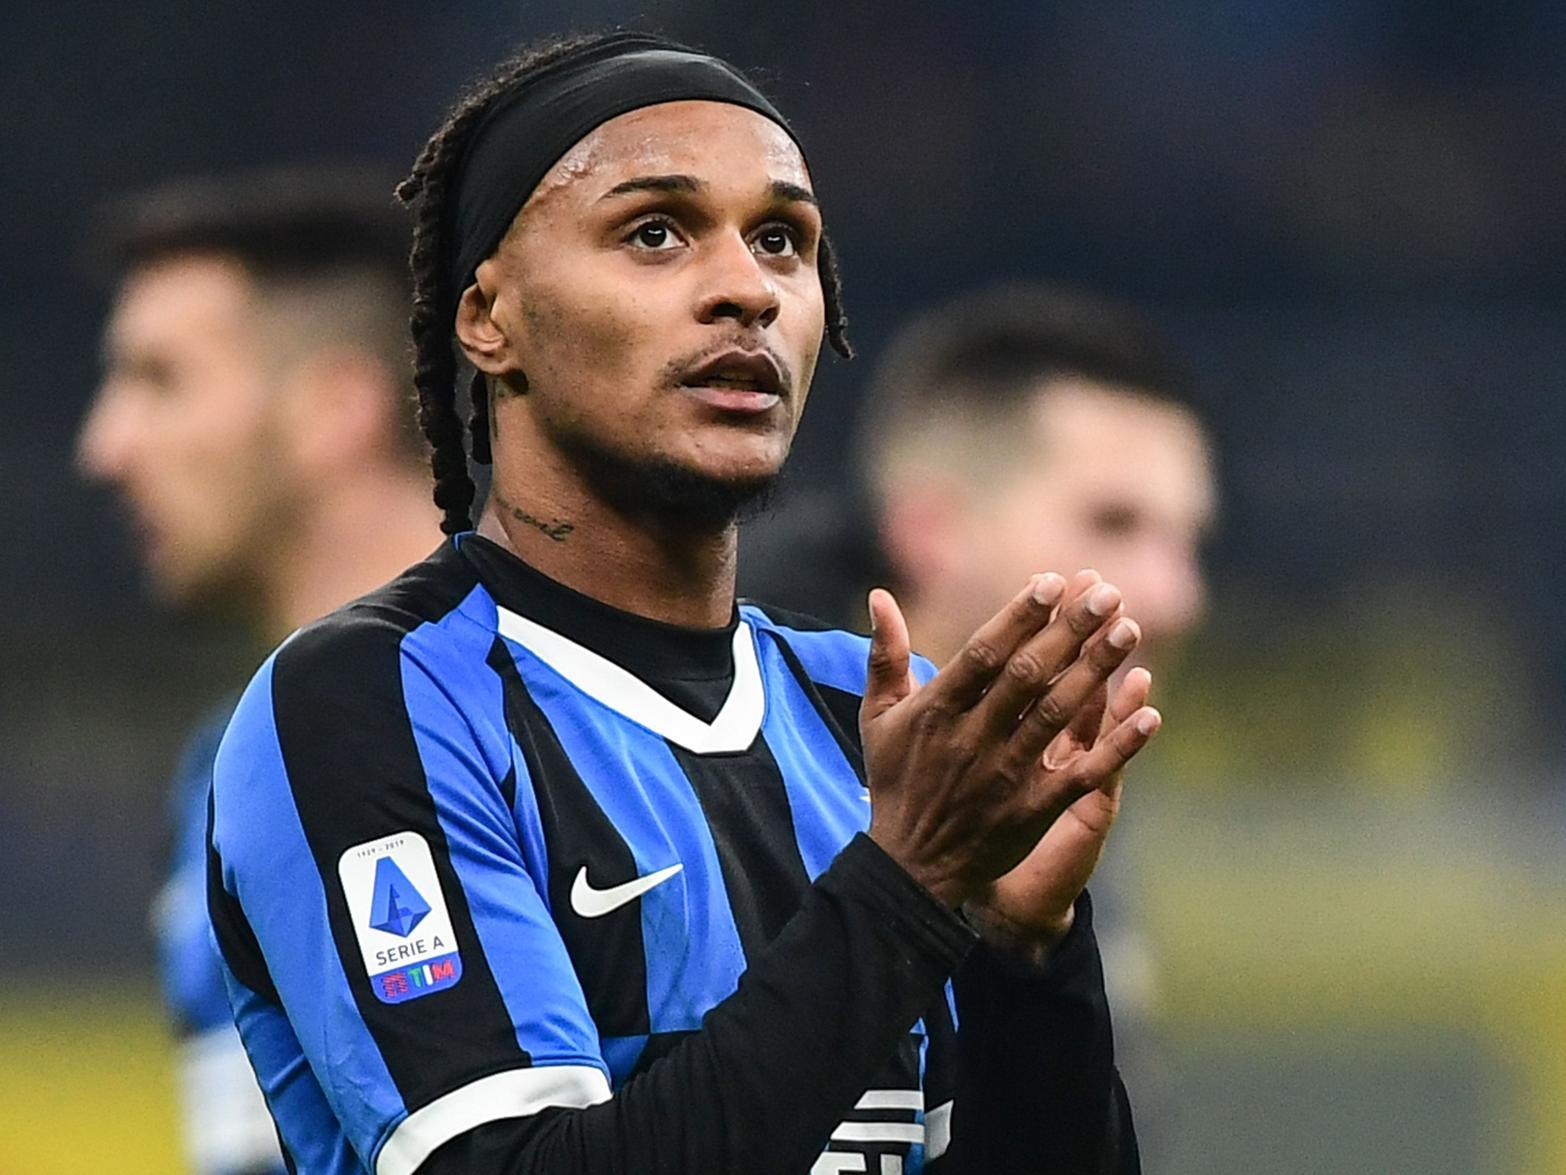 Newcastle United are close to signing Austria winger Valentino Lazaro, 23, on loan from Italian giants Inter Milan, with a potential 17m option to buy. (Tuttomercatoweb)